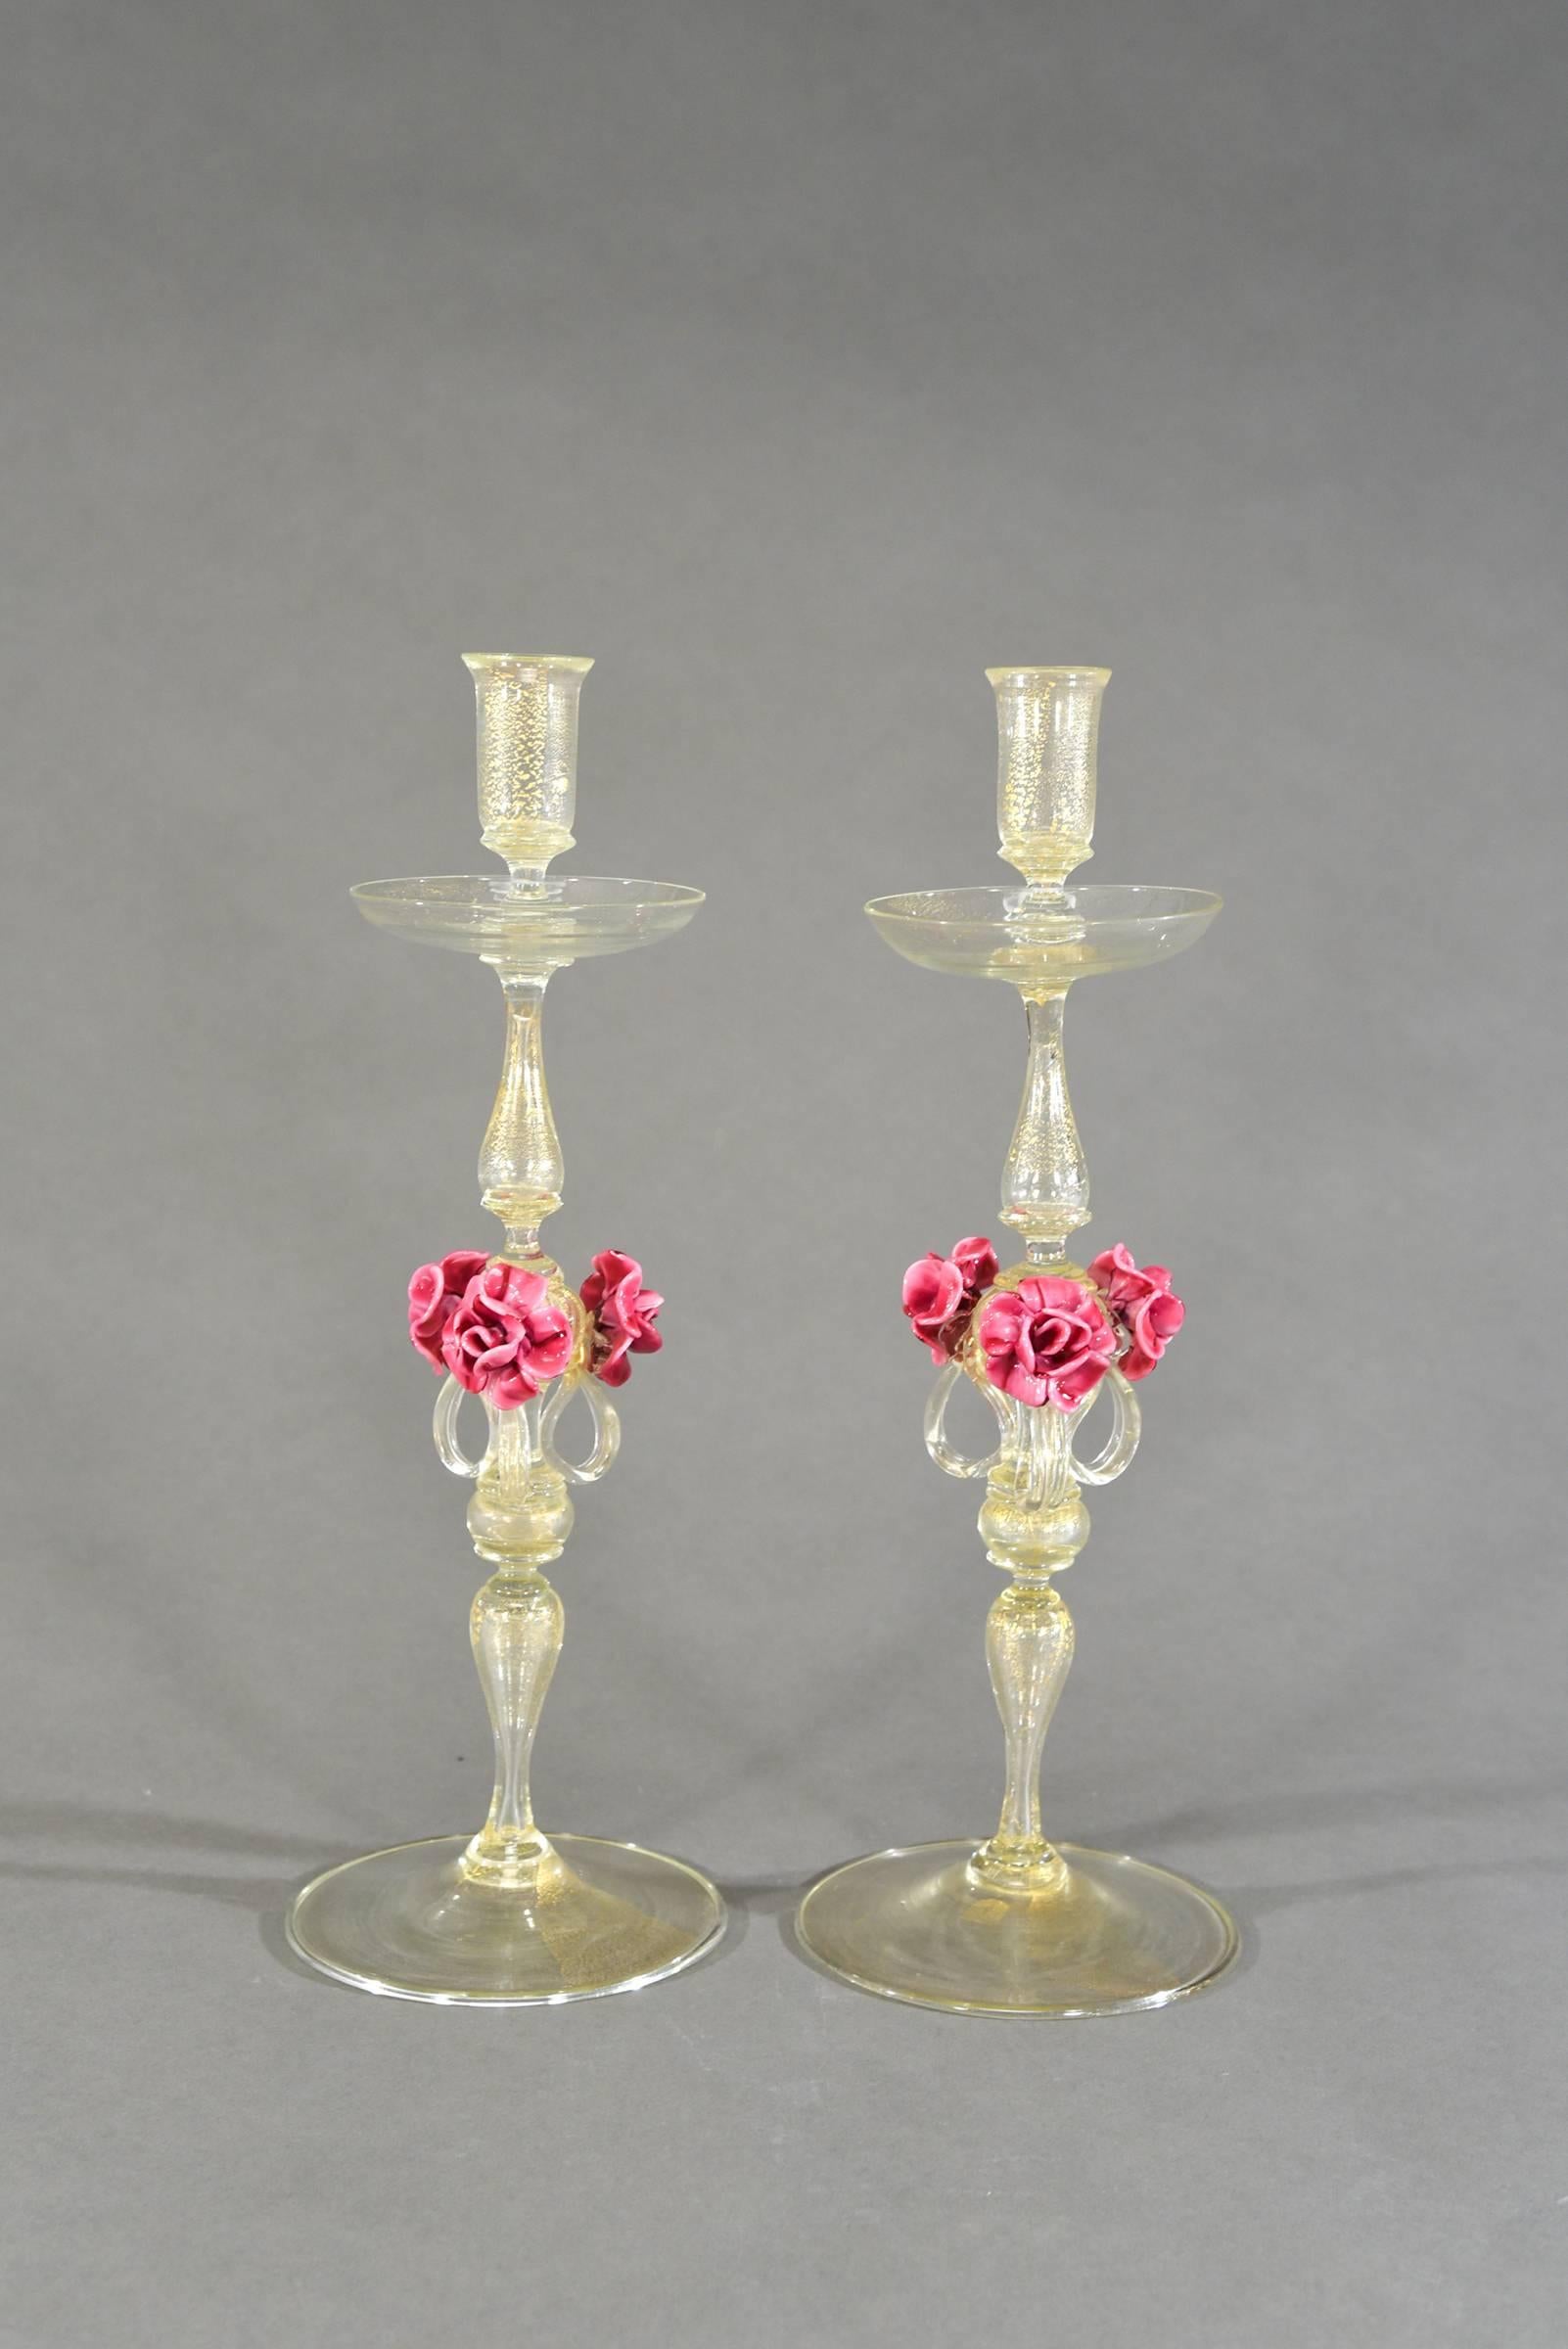 5 Pc. Venetian Centerpiece Set Candlesticks w/ Gold Leaf Applied Pink Roses In Excellent Condition For Sale In Great Barrington, MA